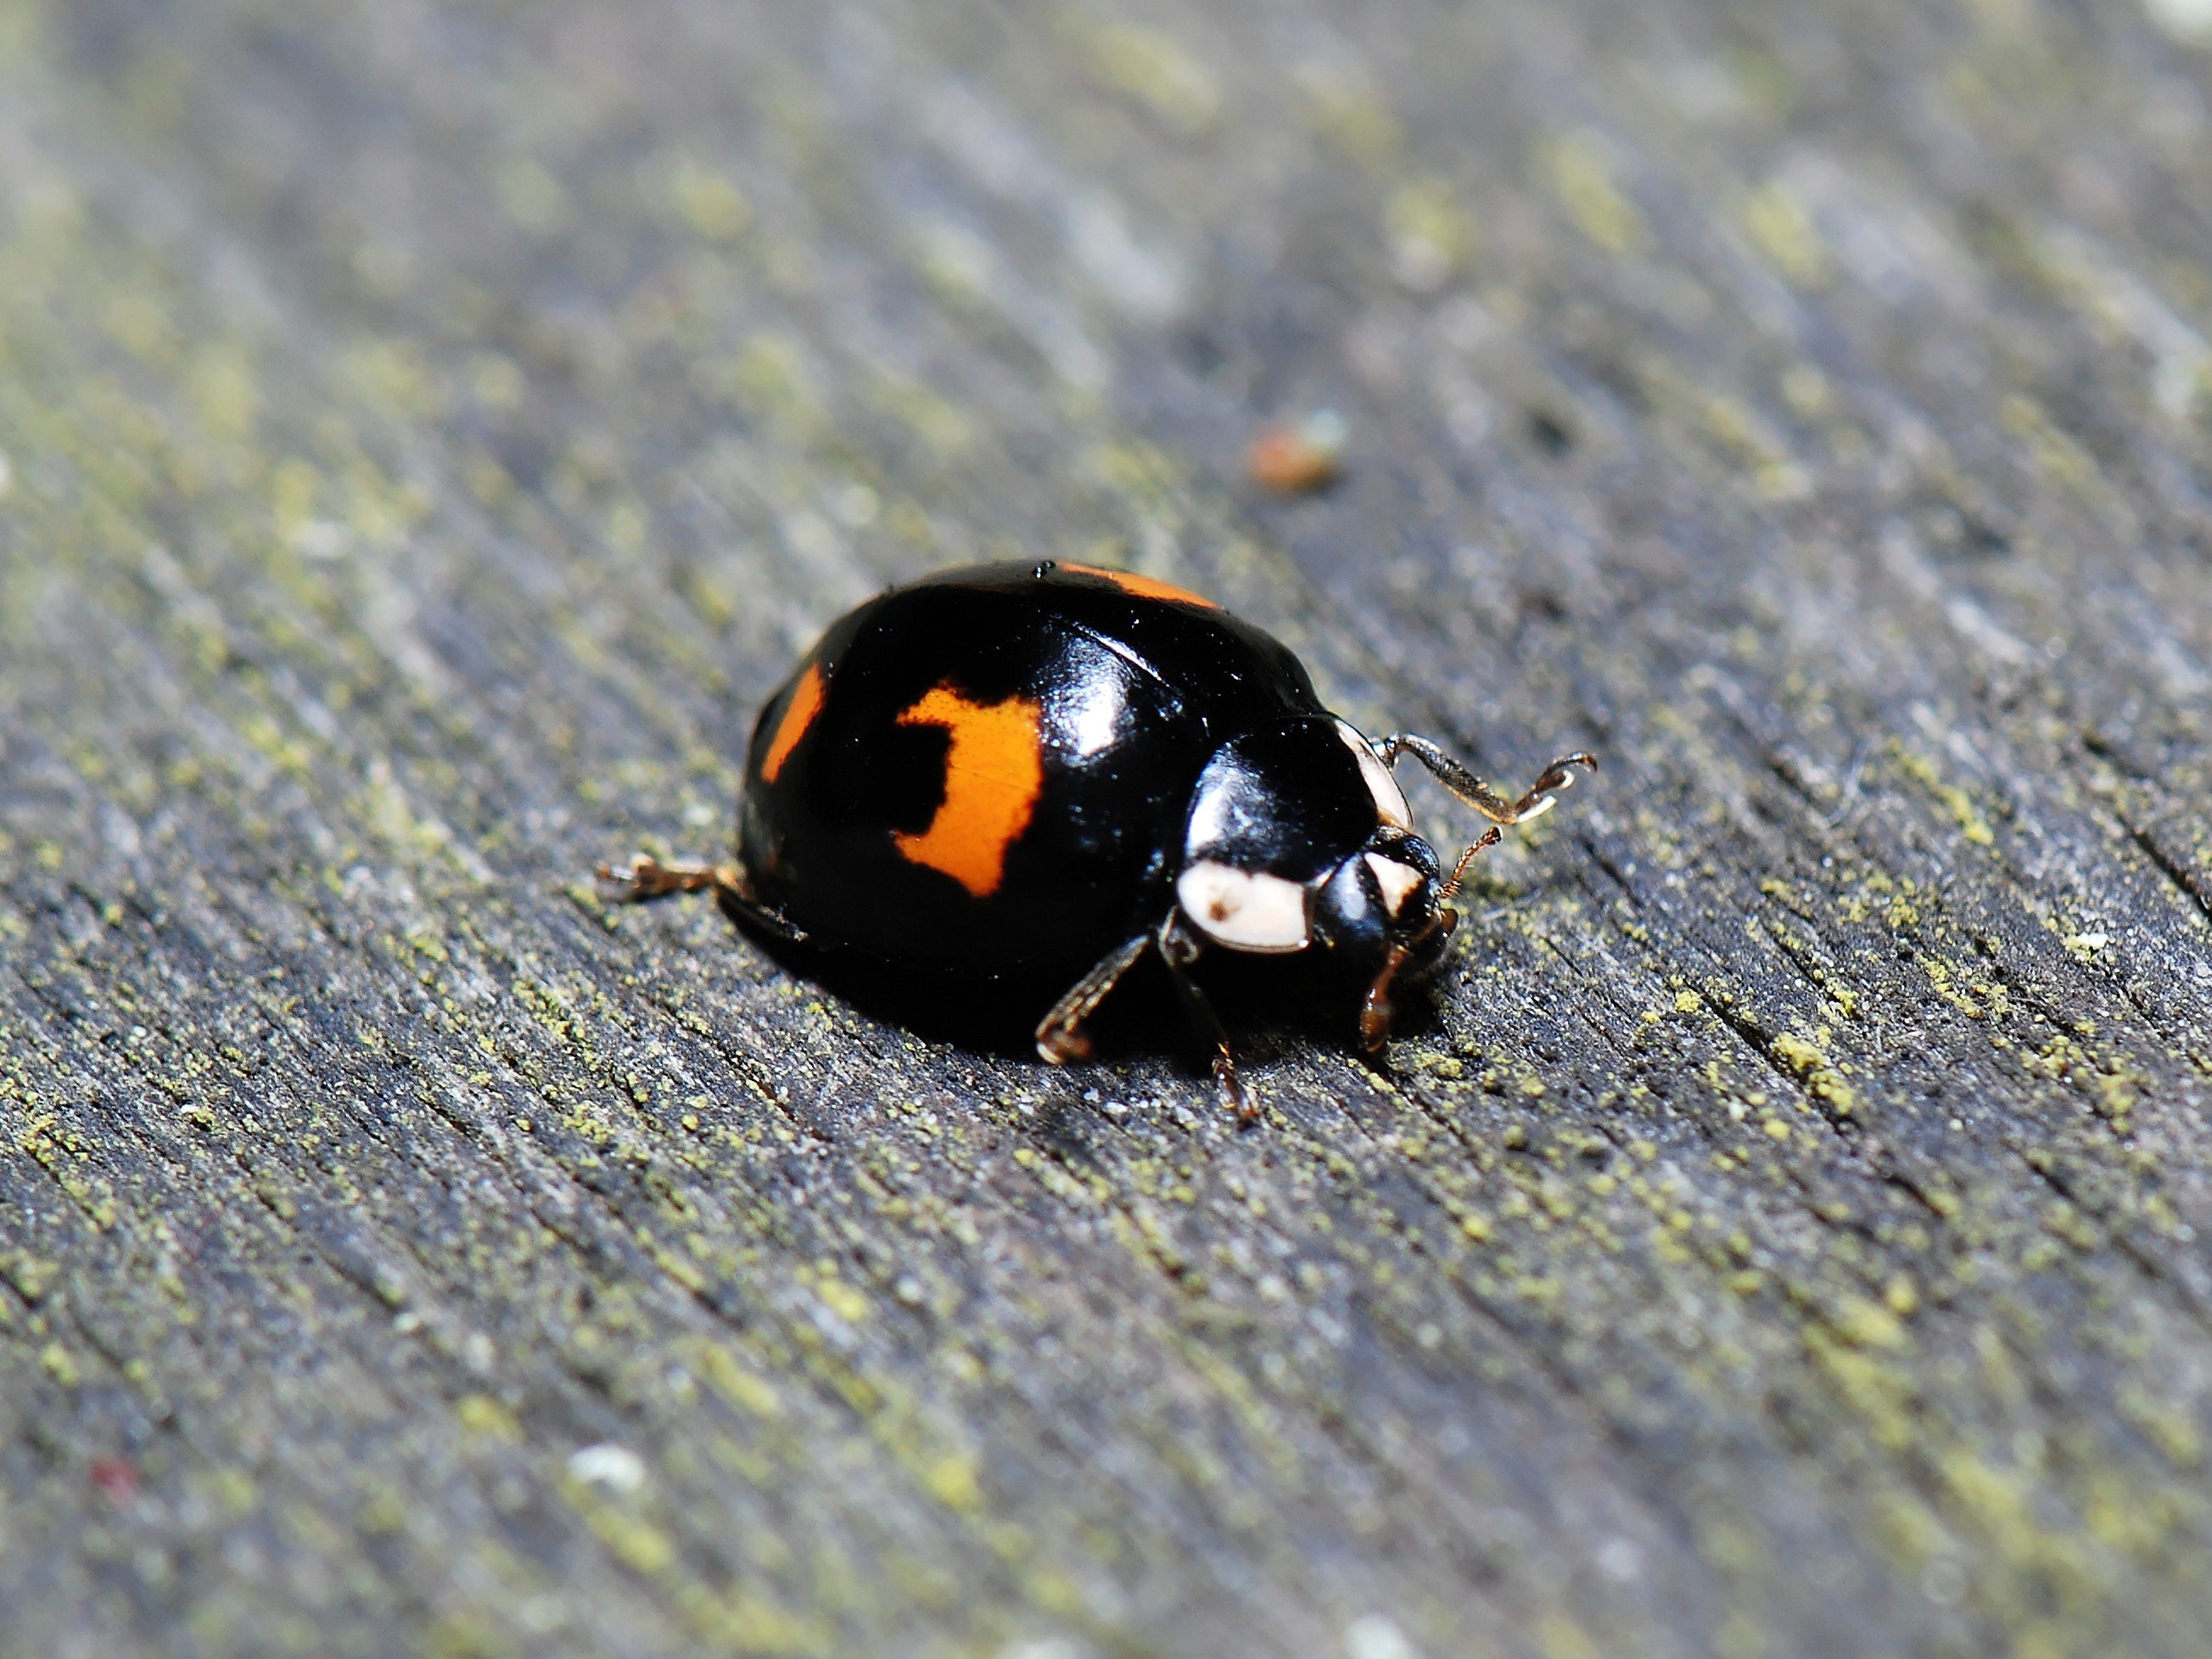 The Harlequin has many colour forms, Red on black, black on red, yellow on blackand black on orange.